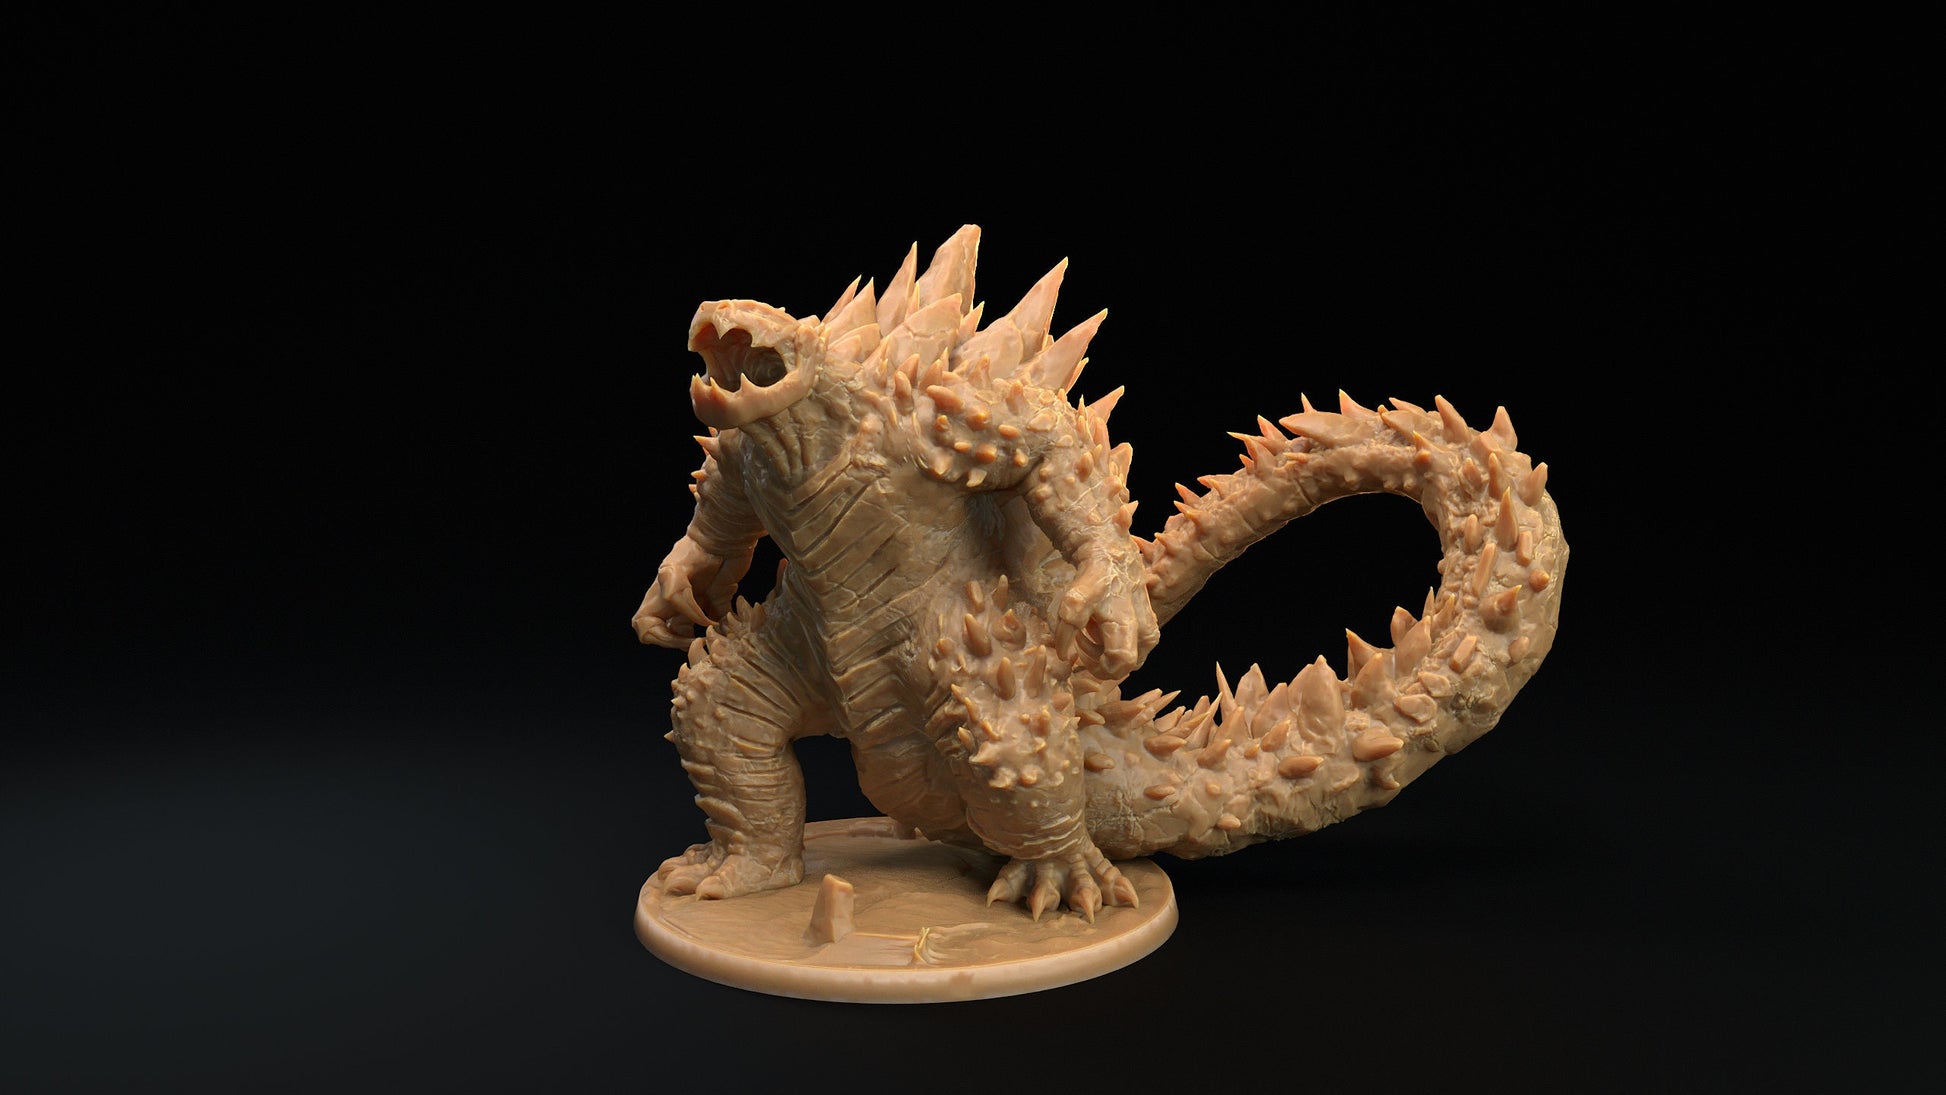 Kazankeshi | RPG Miniature for Dungeons and Dragons|Pathfinder|Tabletop Wargaming | Monster Miniature | Dragon Trappers Lodge